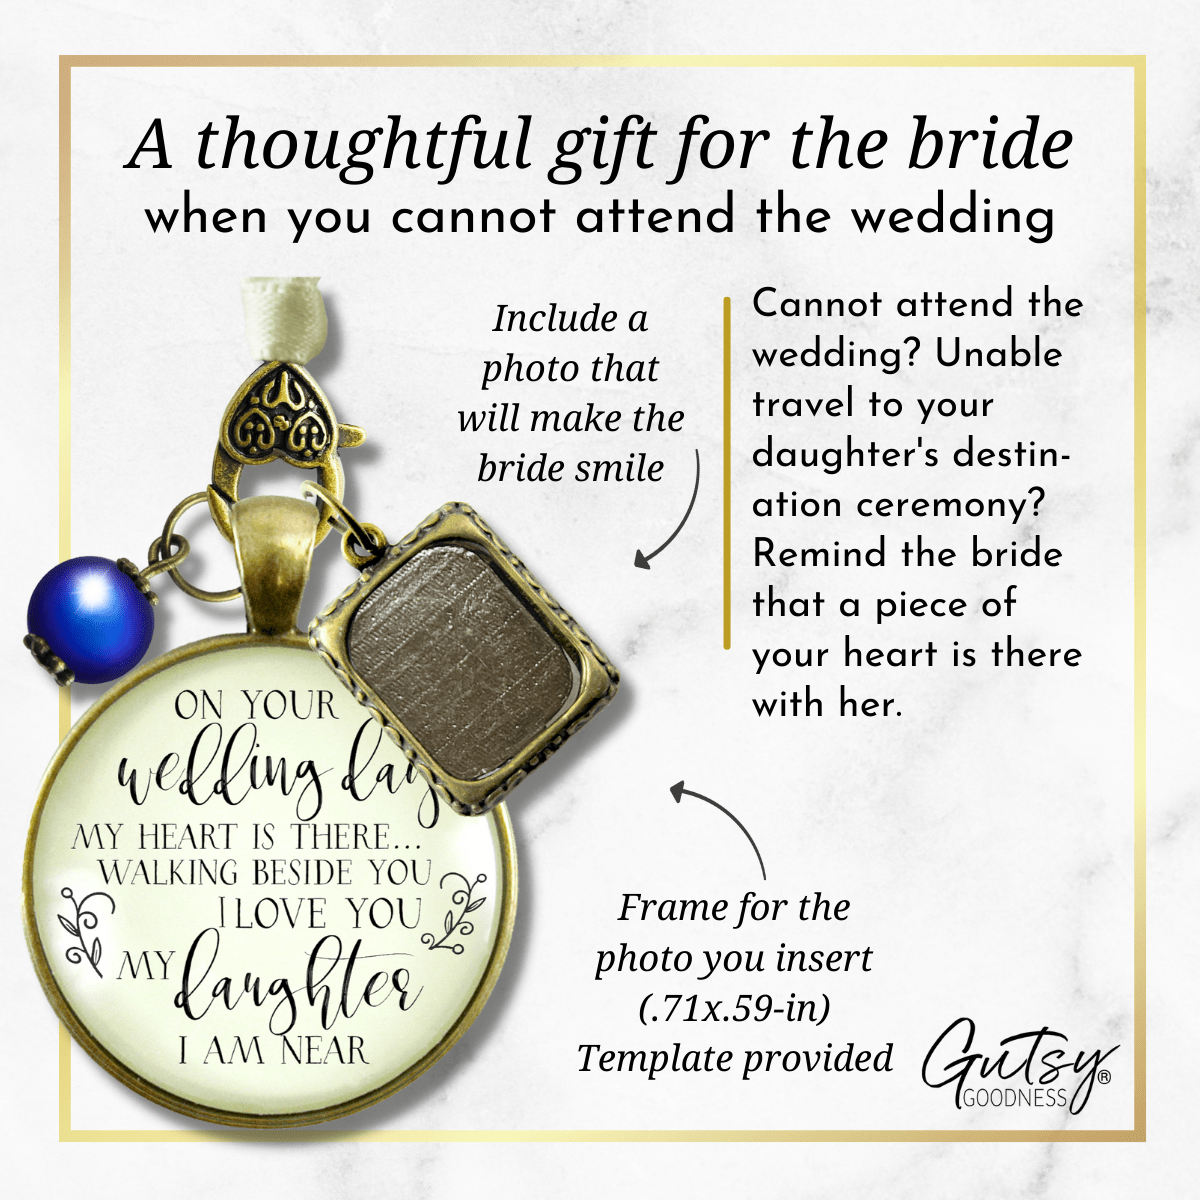 On Your Wedding Day MY Heart Is There Walking Beside You DAUGHTER - DESTINATION BRONZE - CREAM - BLUE BEAD